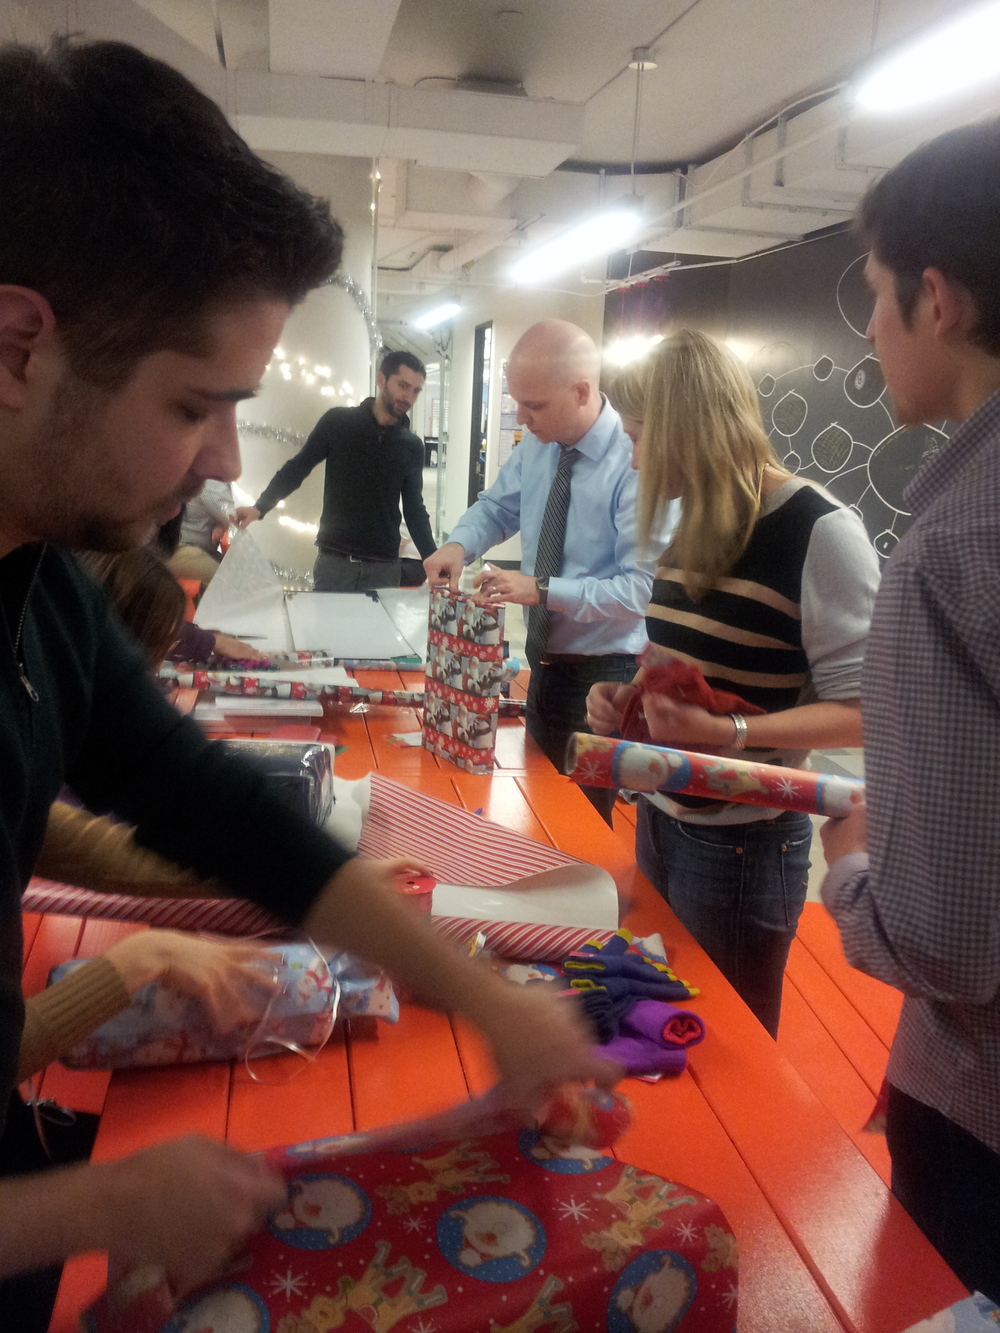 At our holiday party everyone pitched in a hand to help wrap.